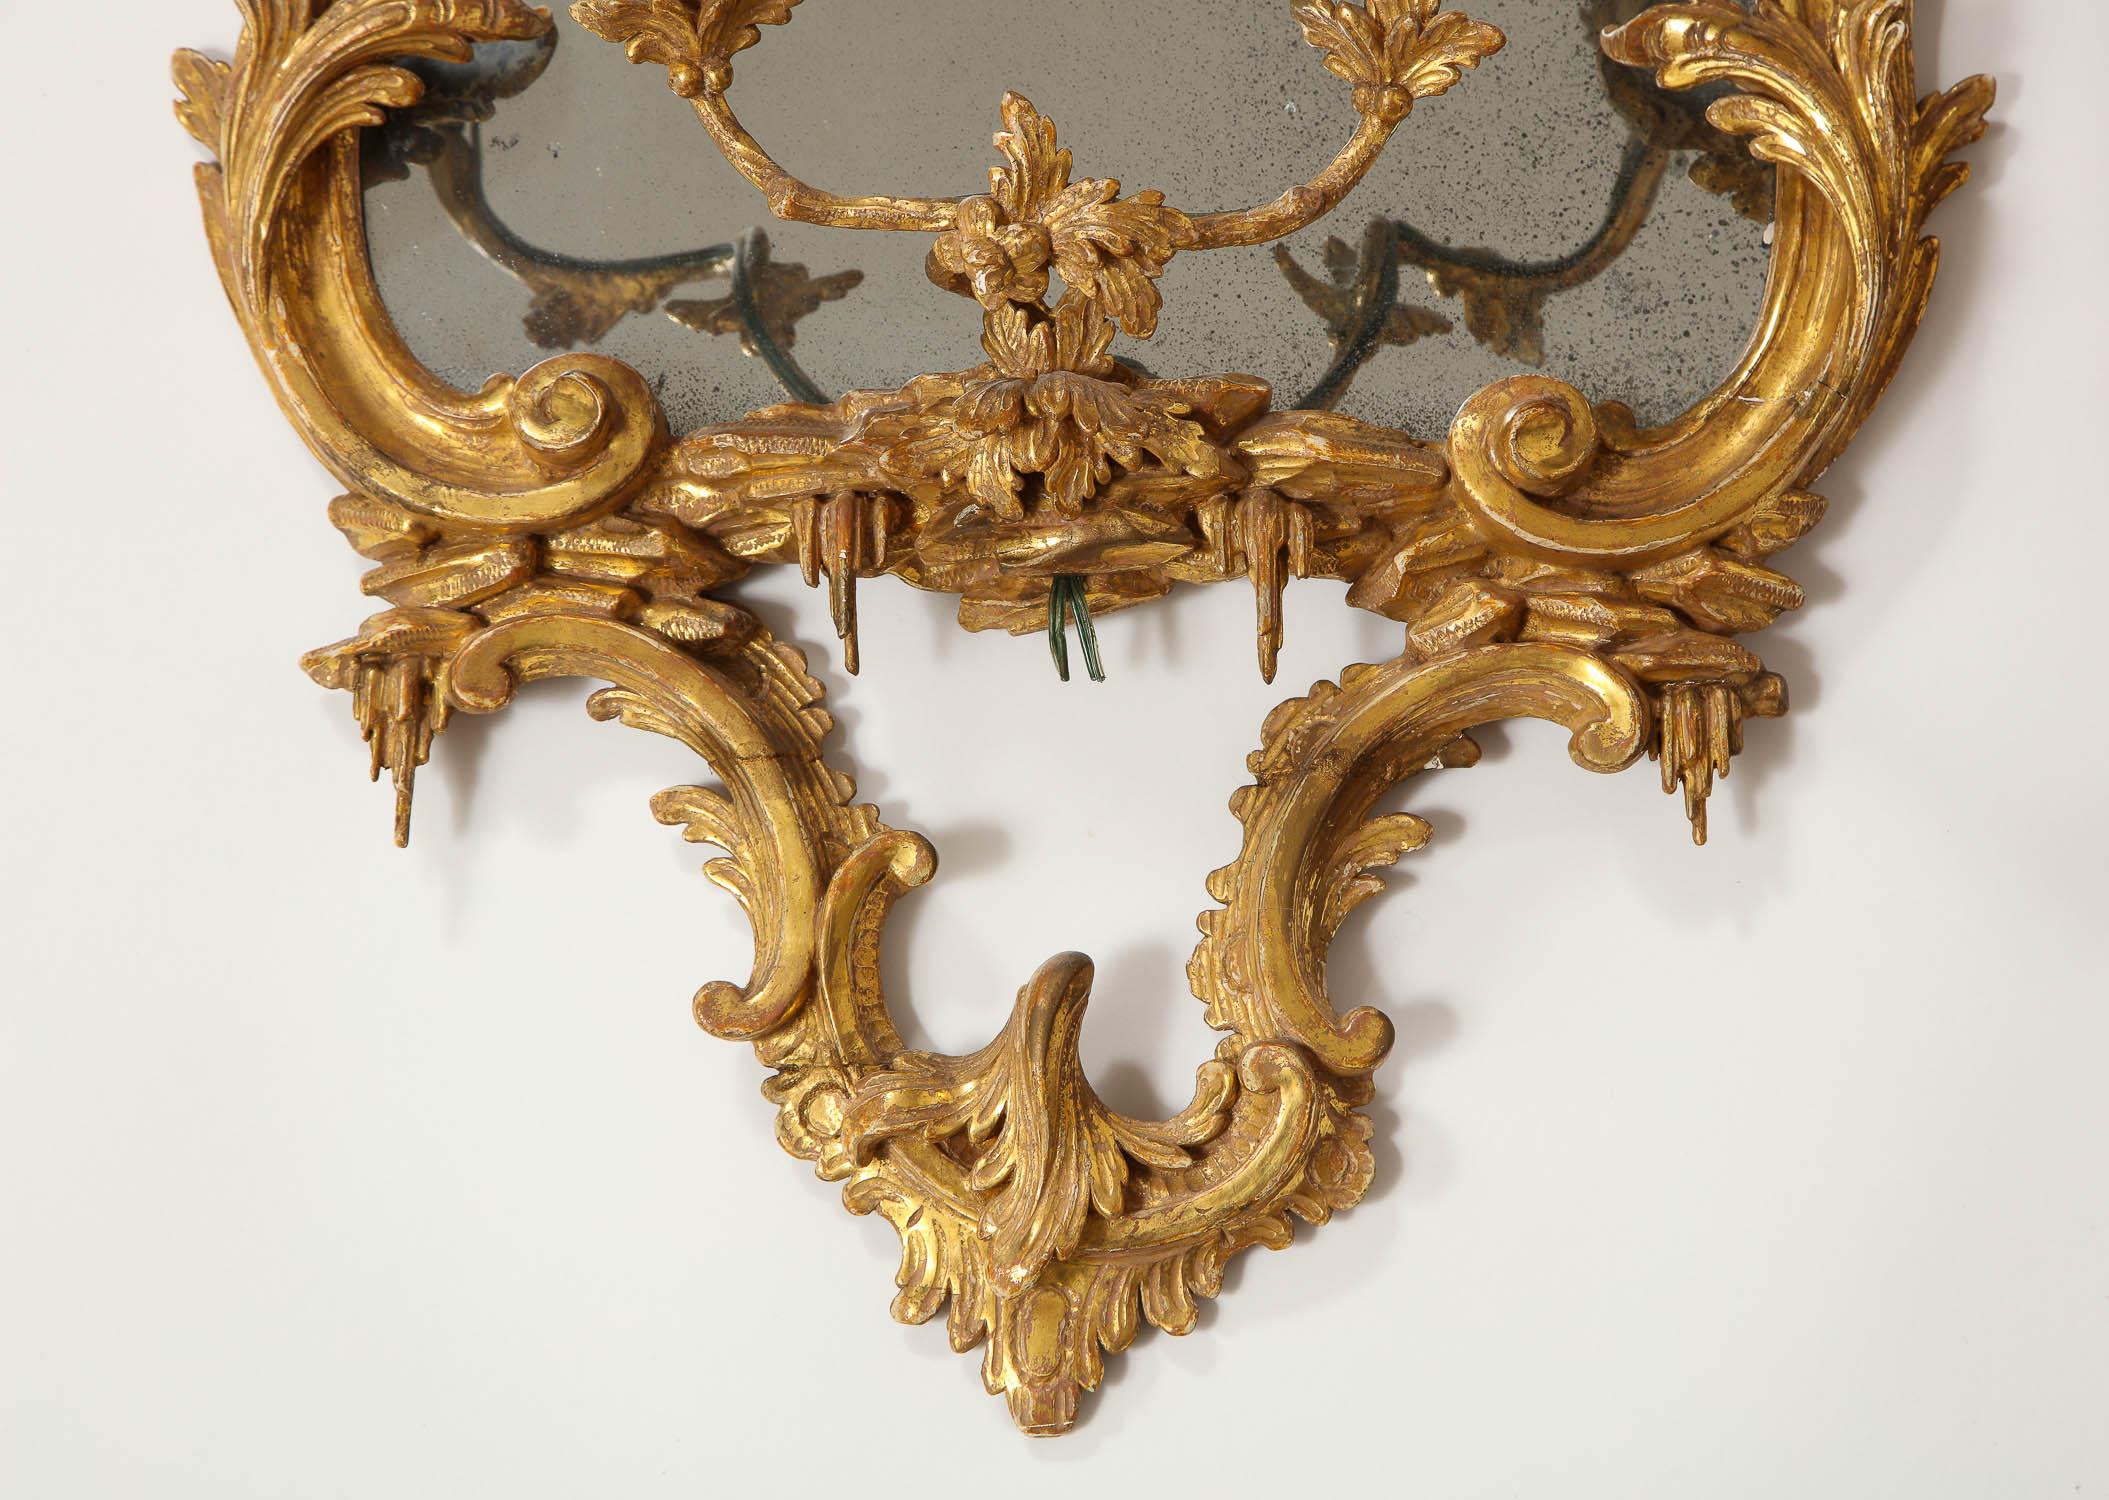 Pair of 18th Century English Giltwood Chinoiserie Mirrors with Candleholders In Good Condition For Sale In New York, NY